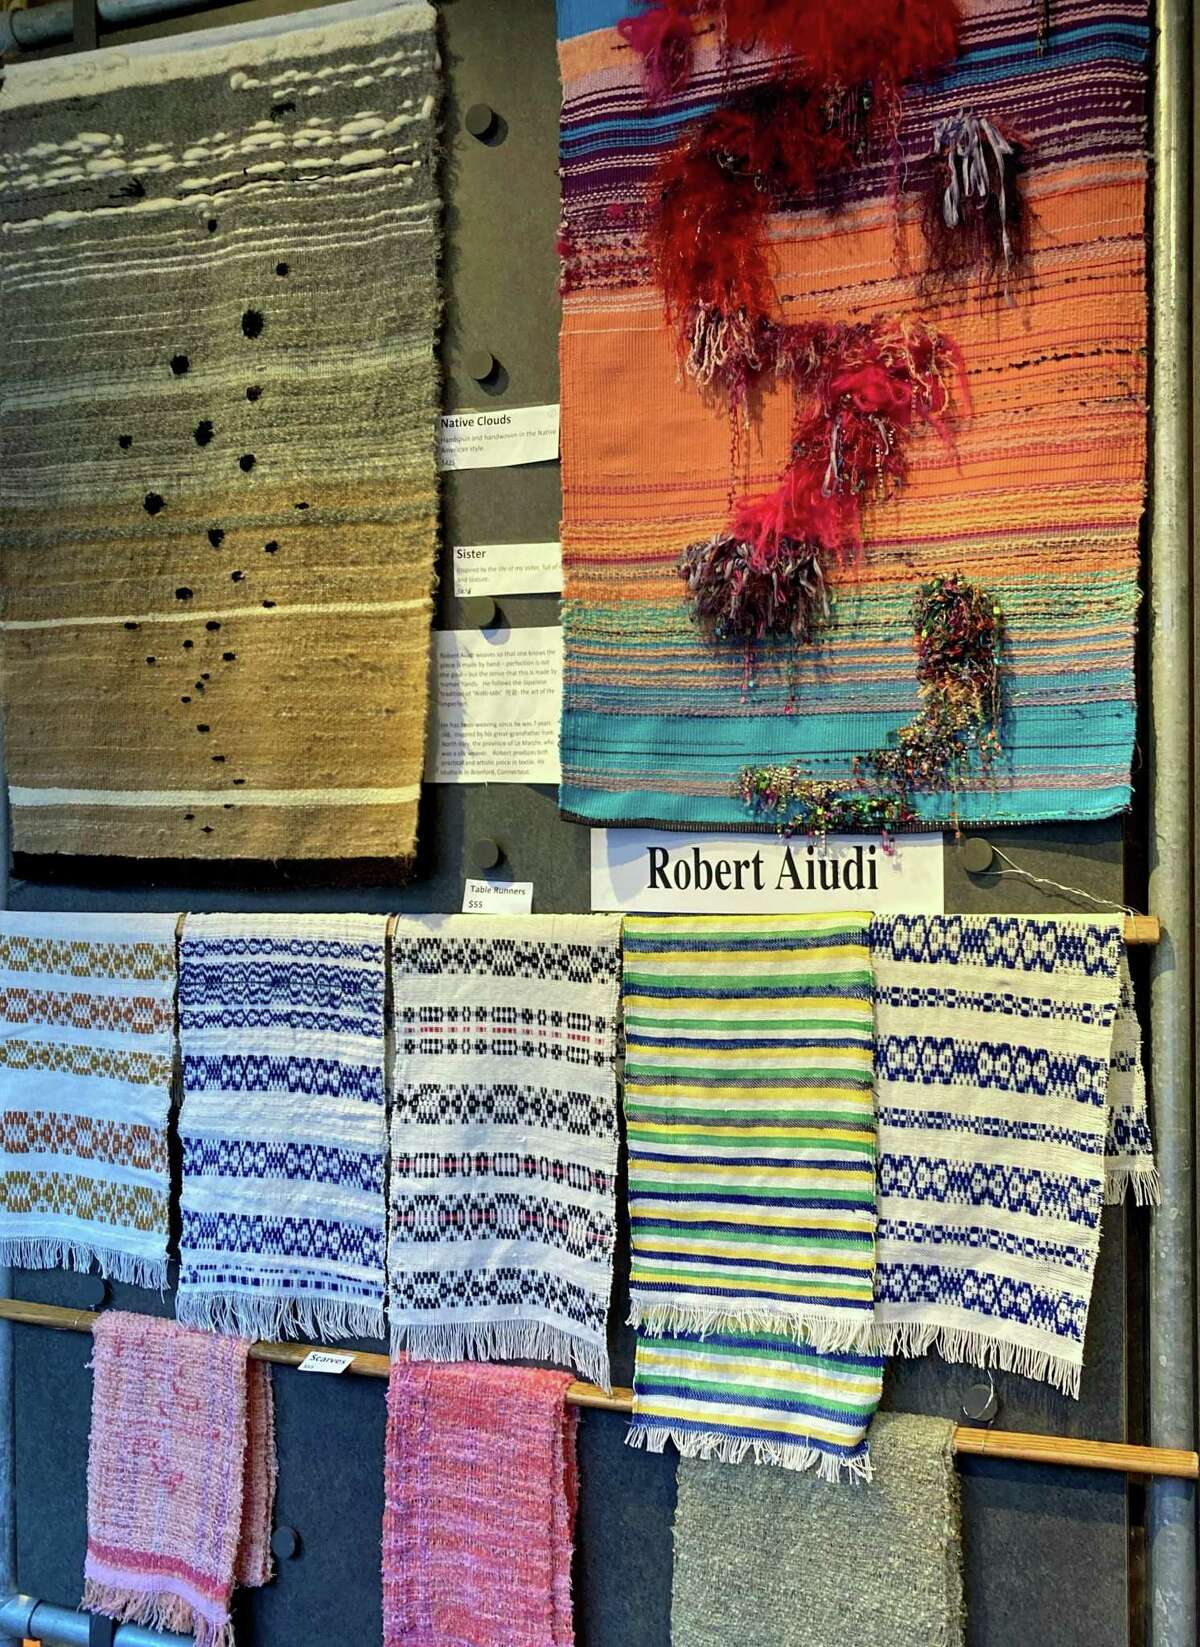 Weaver Robert Aiudi will be featured at the Market. Above, his work hands in the gallery now.